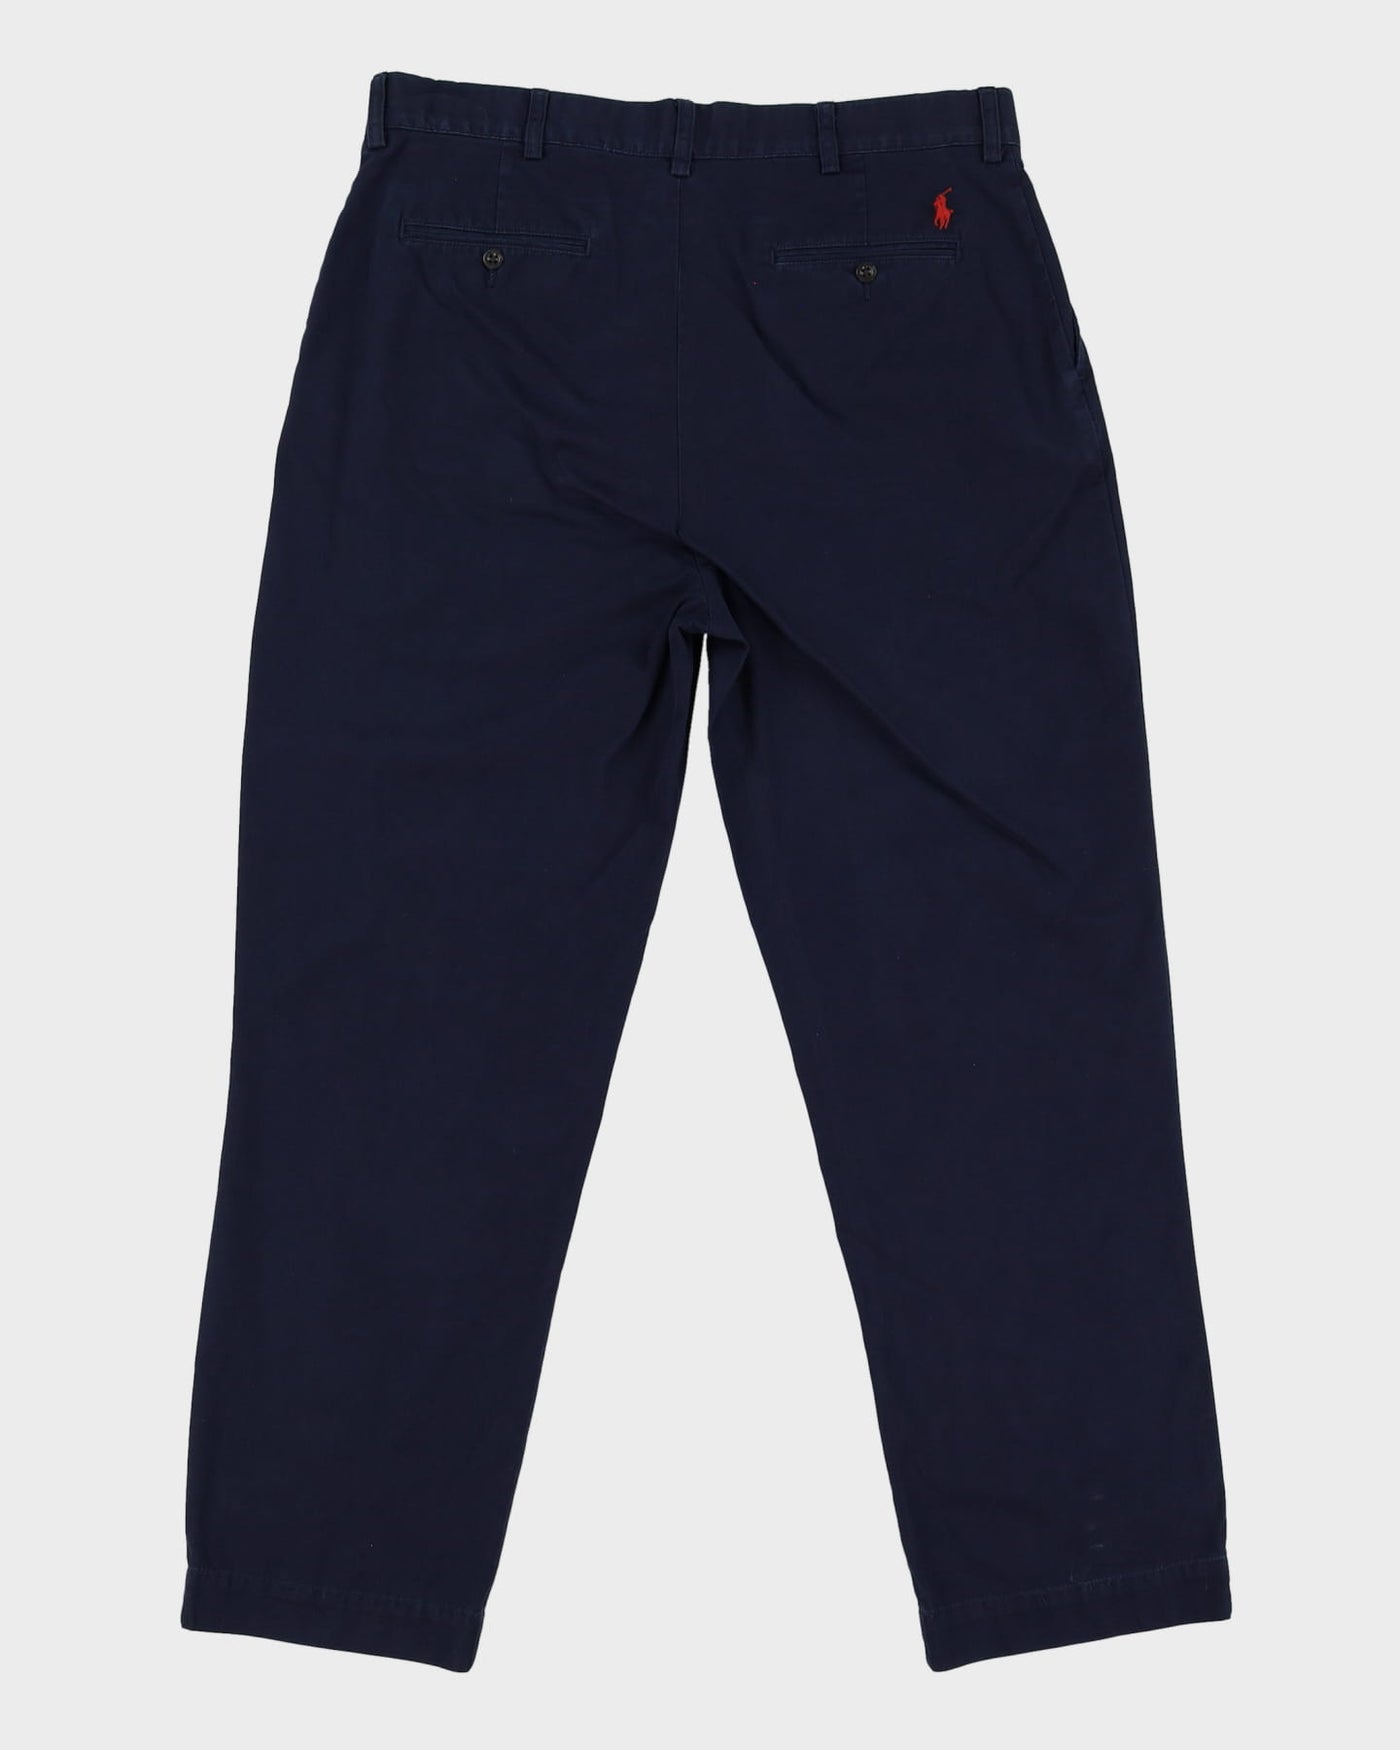 Polo Ralph Lauren Navy Casual Chino Trousers - W36 L30